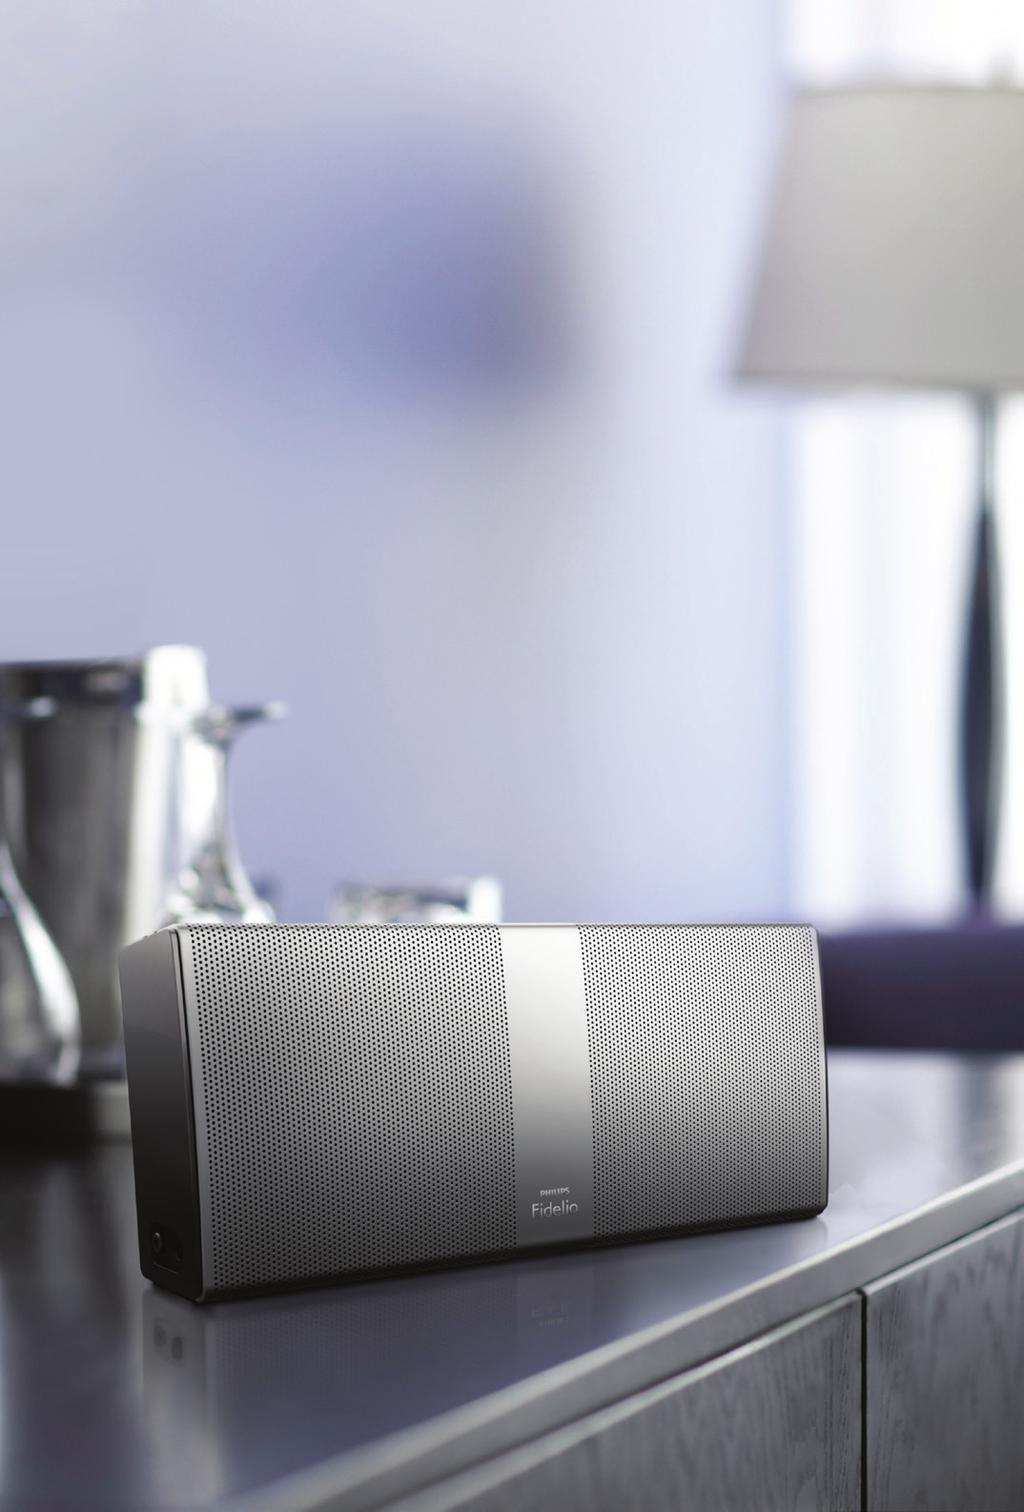 A timeless design, built to last Sleek and good-looking, in a timeless design and built to last, these speakers exhibit all the key signatures expected from the Philips Fidelio